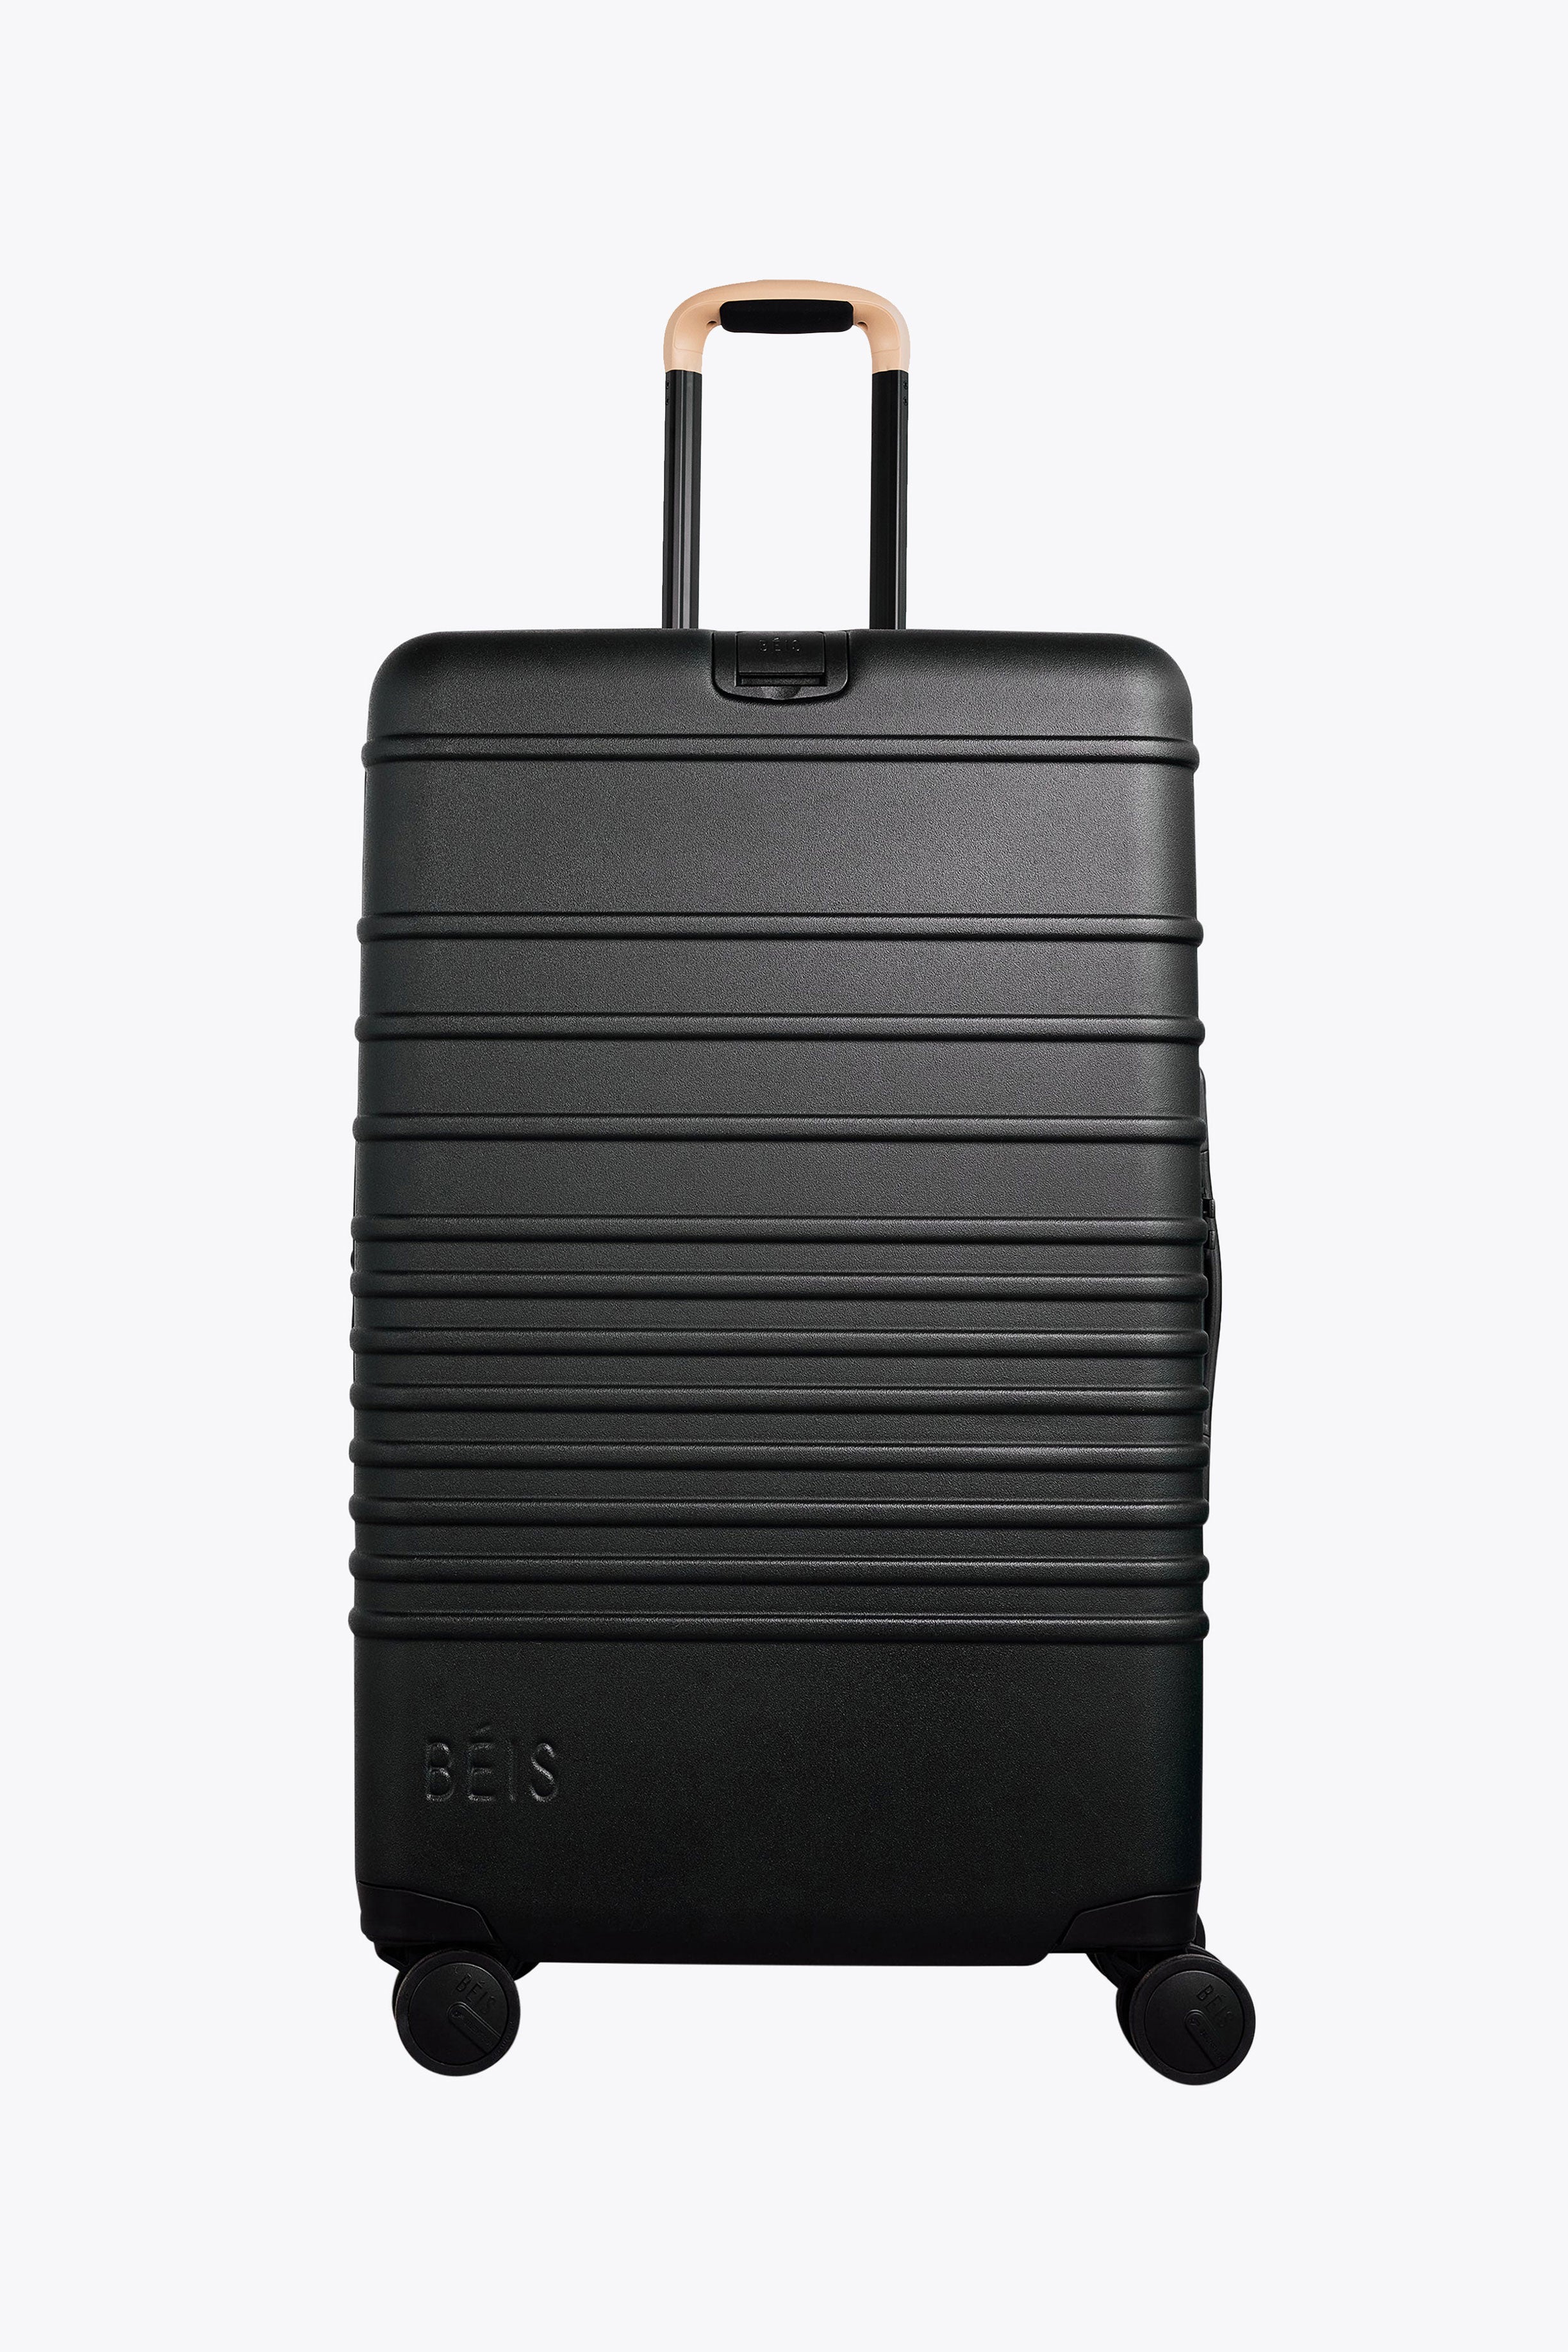 Decathlon MH100 30L as personal item for wizzair and ryanair : r/onebag